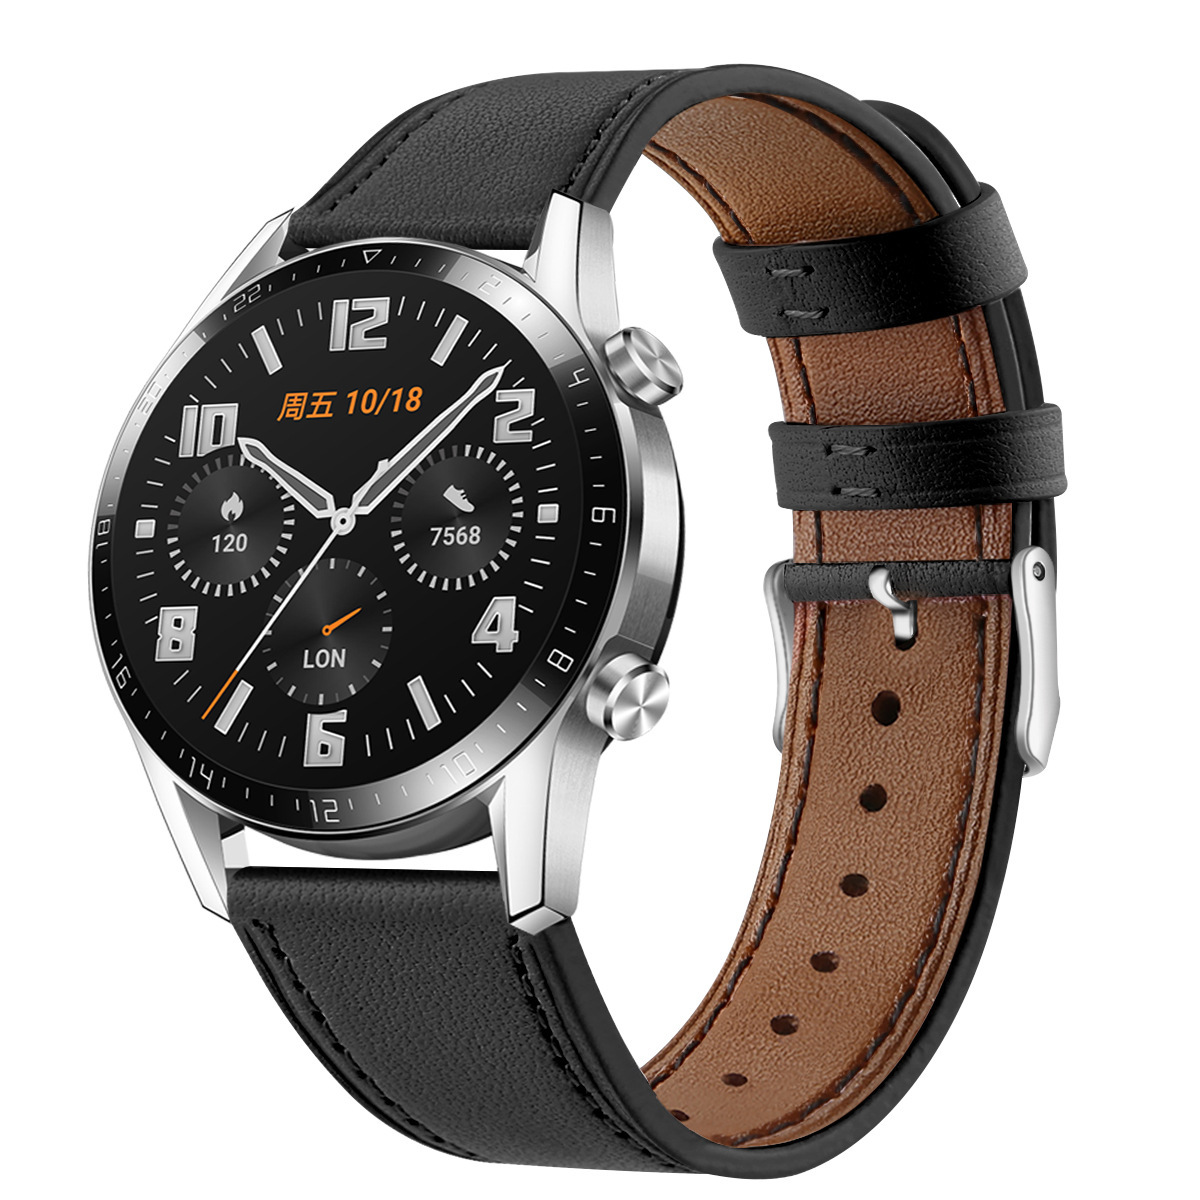 Bakeey-22mm-Replacement-Strap-Genuine-Leather-Smart-Watch-Band-For-Huawei-WATCH-GTGT2-46MM-1656574-1